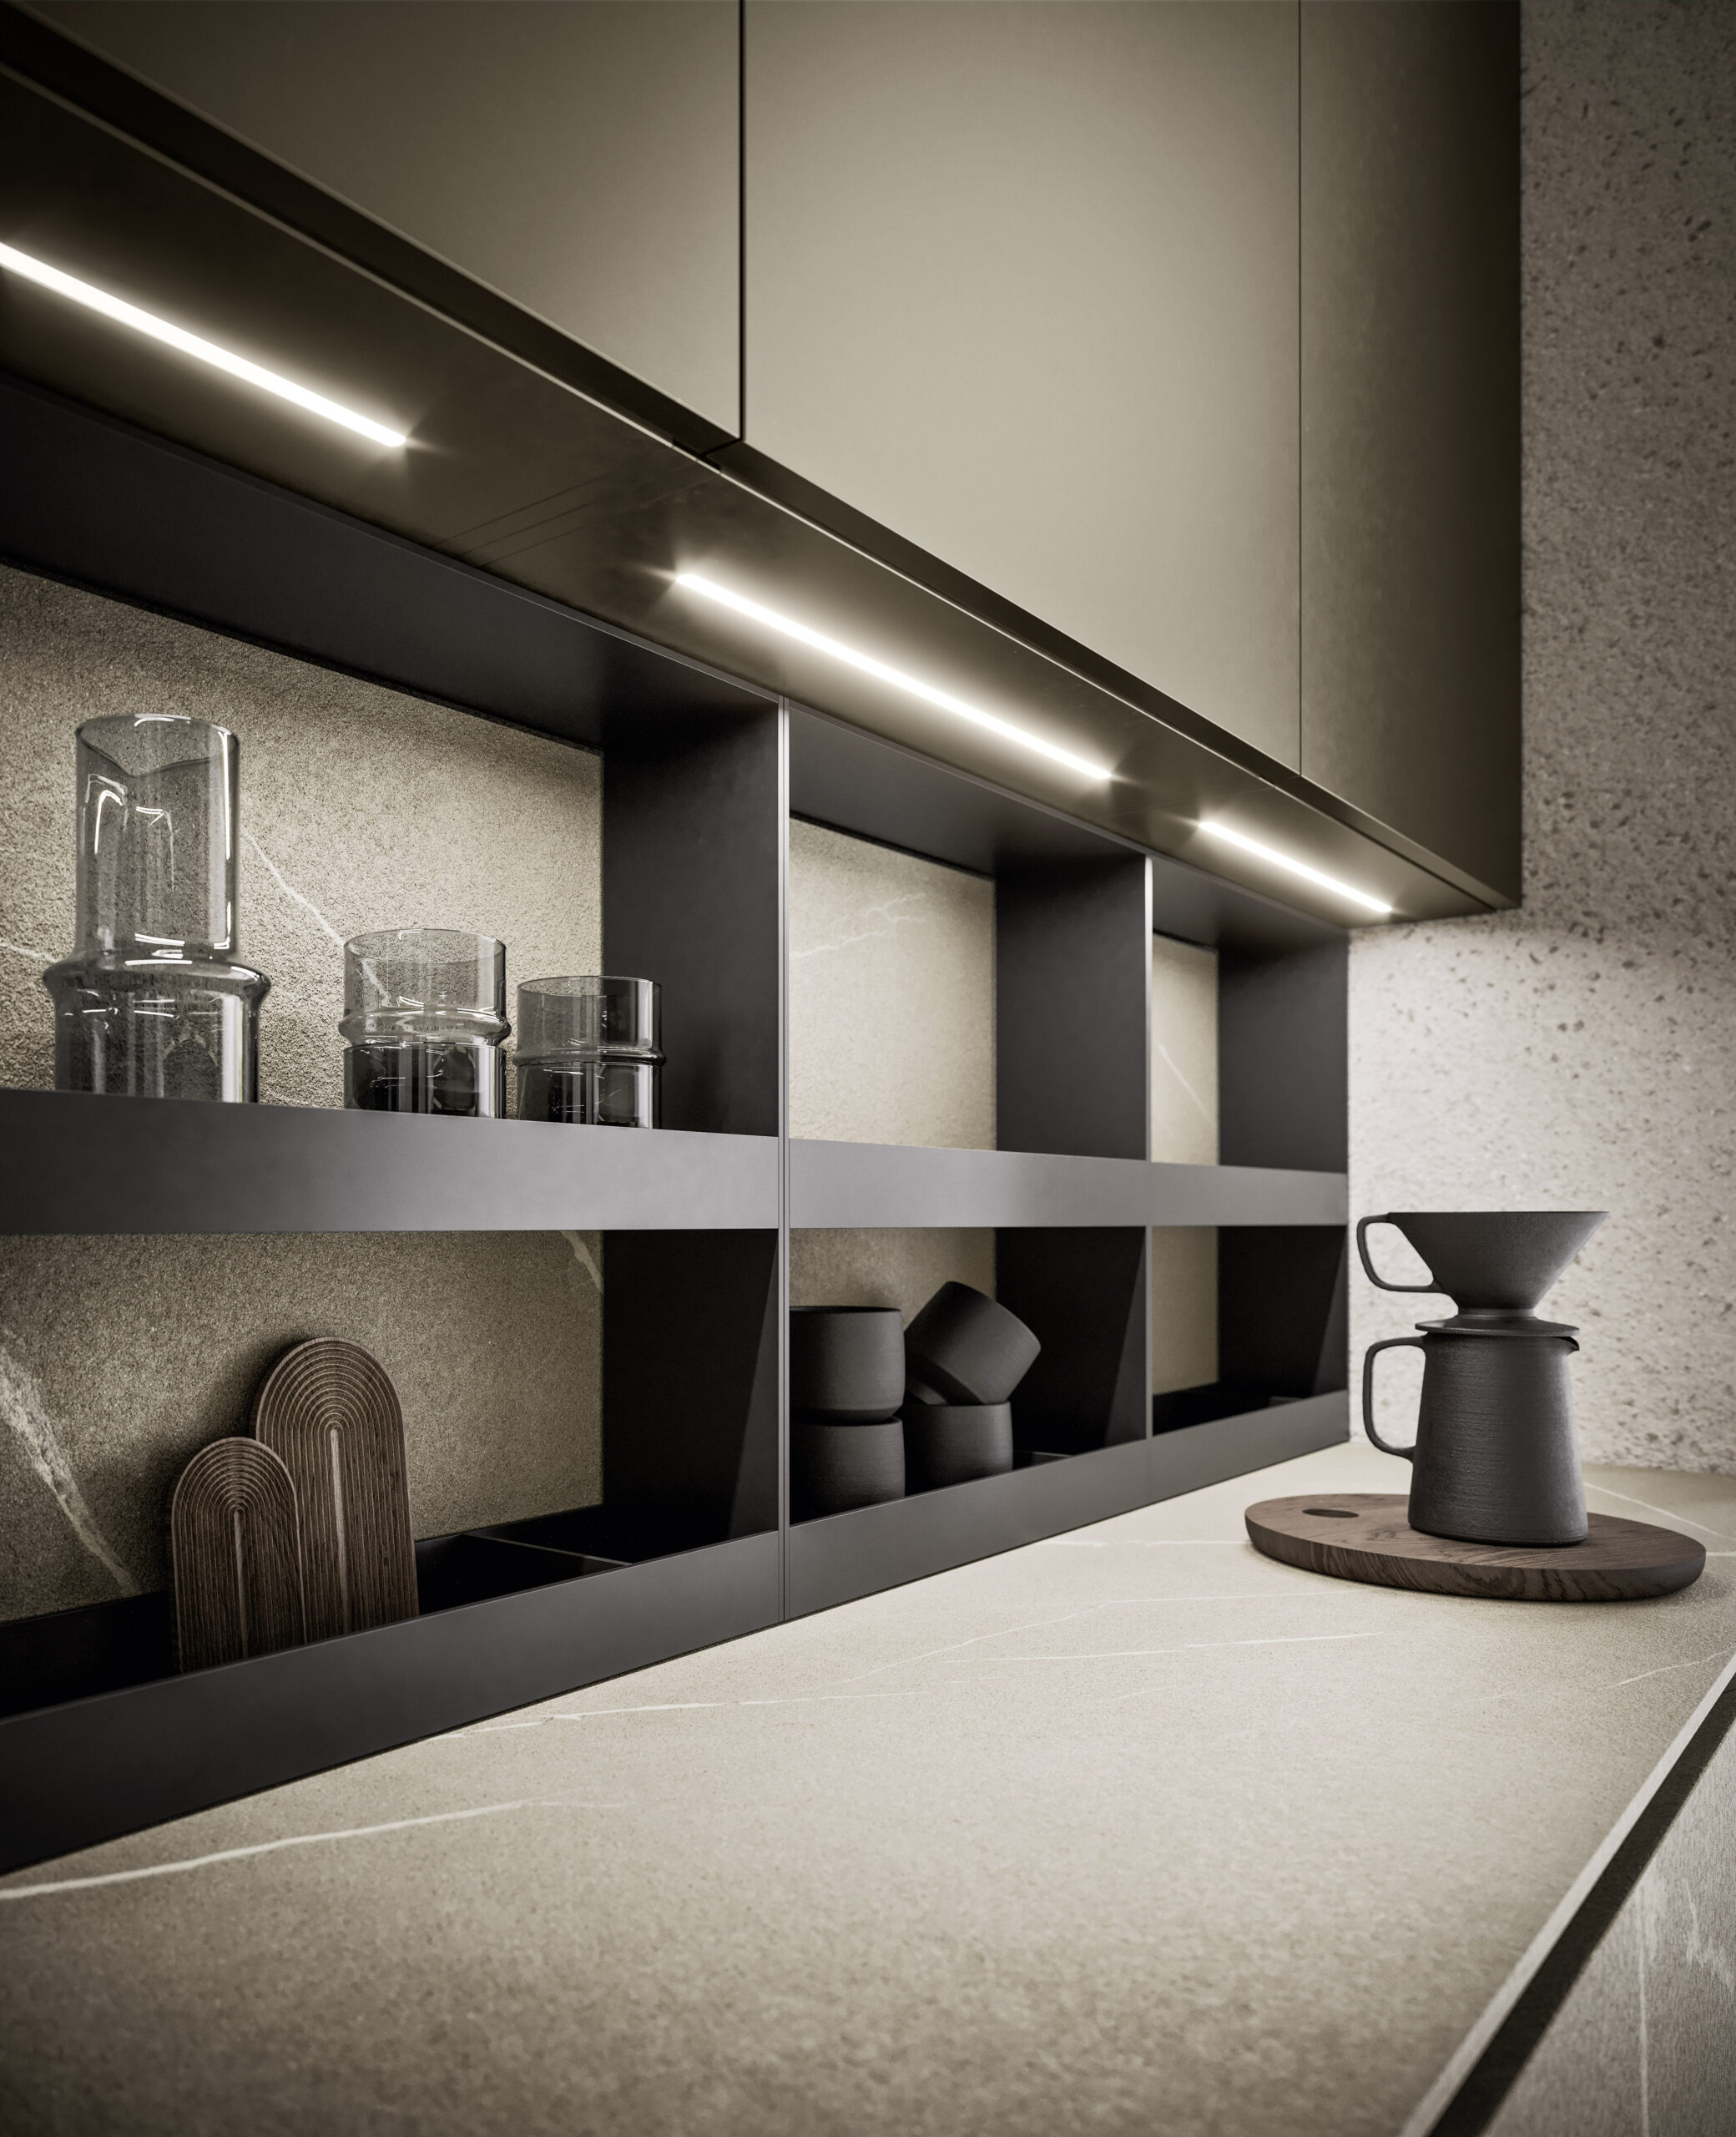 Illustration of layered lighting techniques in a luxury kitchen